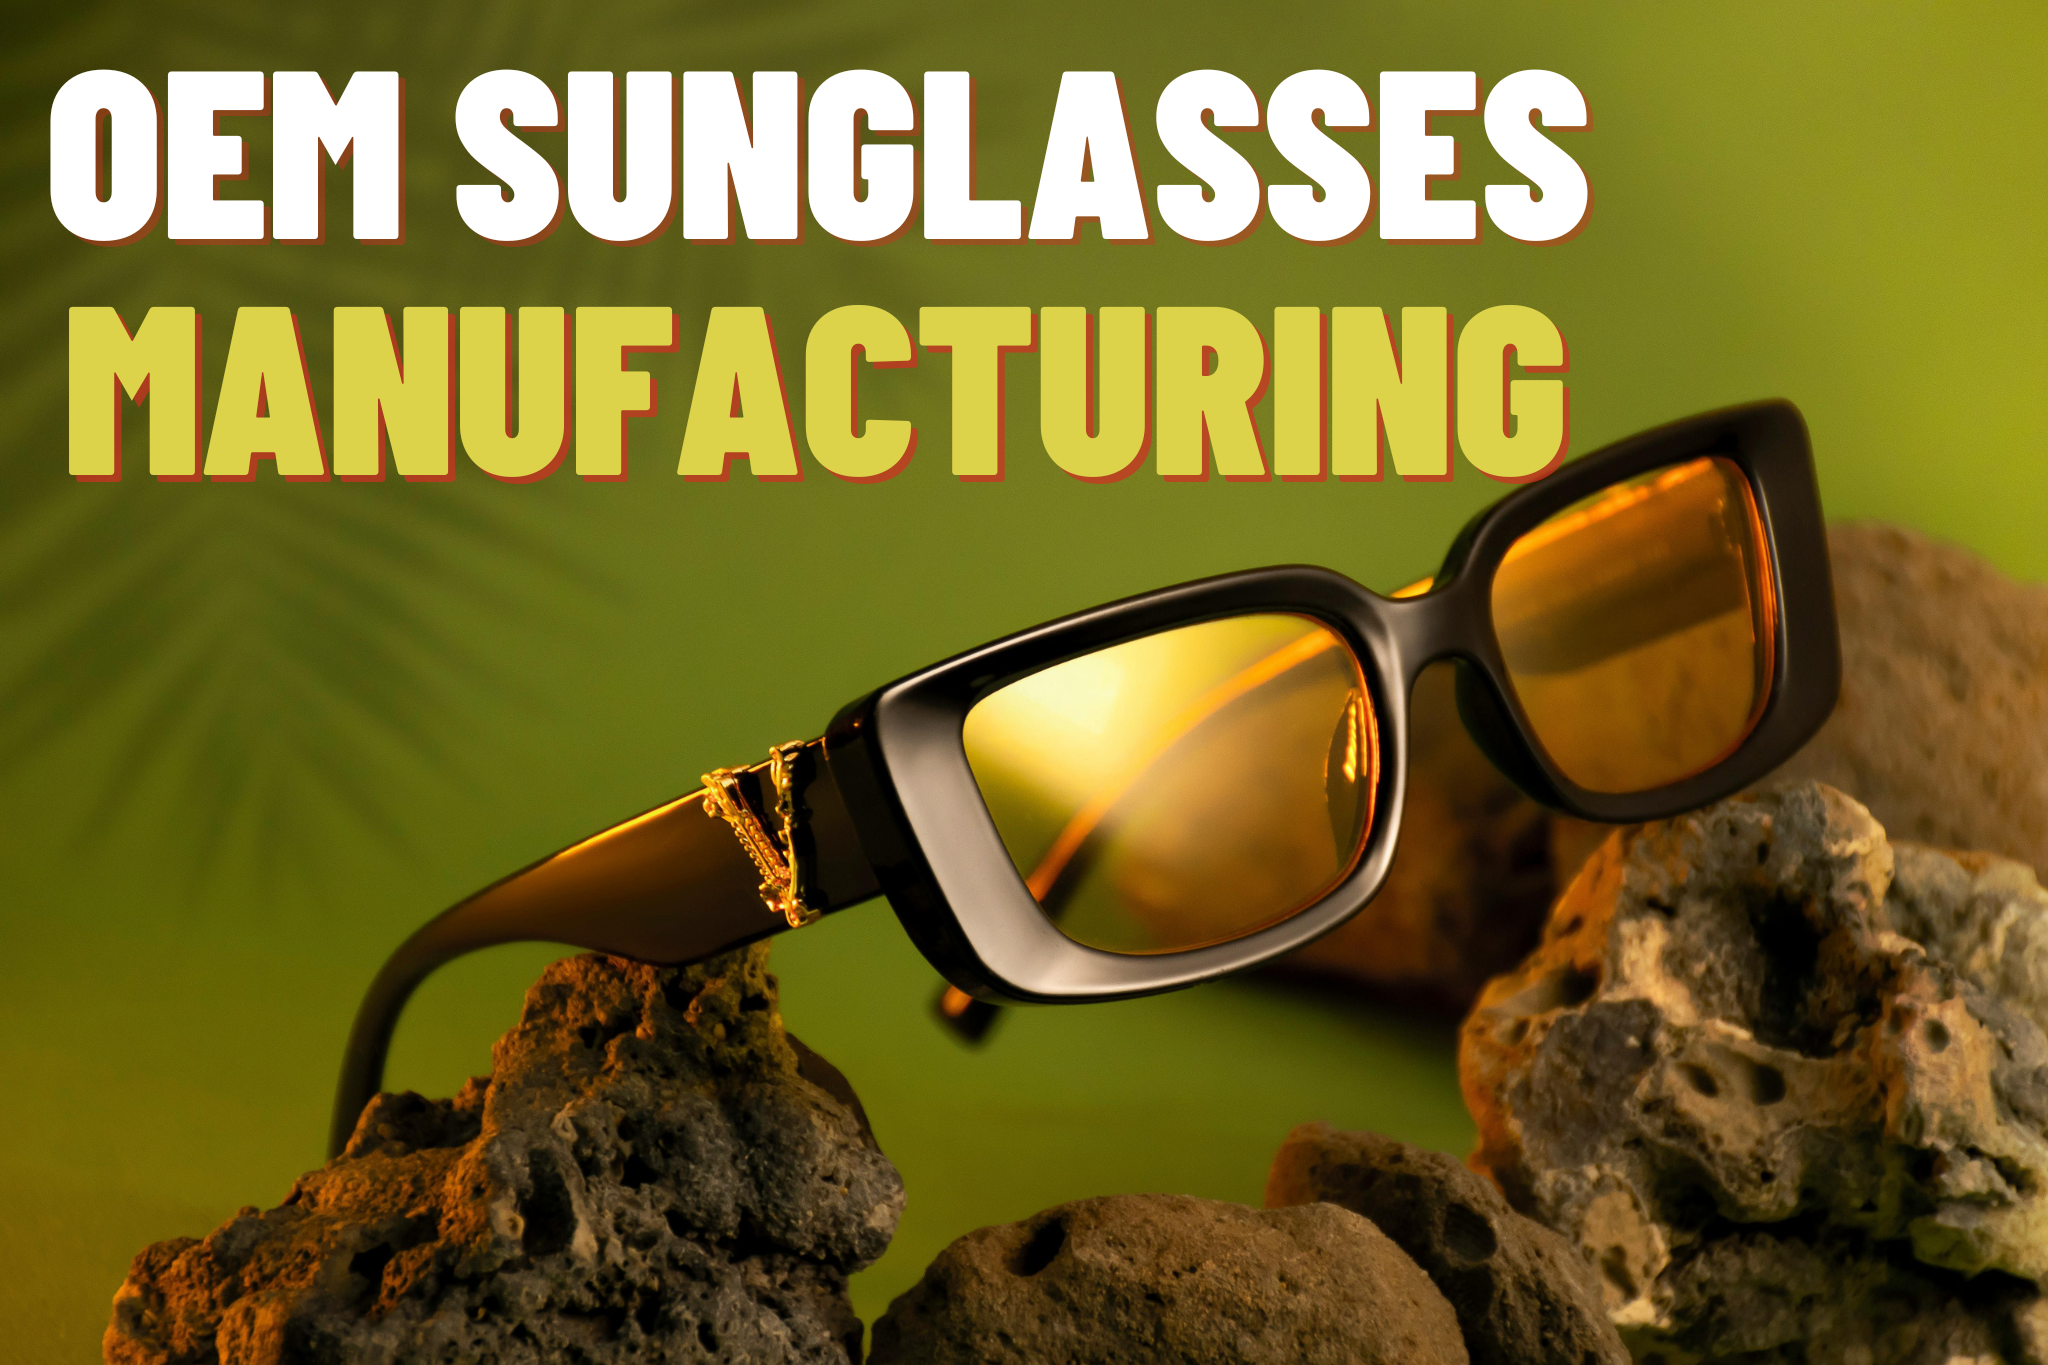 OEM Sunglasses: Things You Need to Know